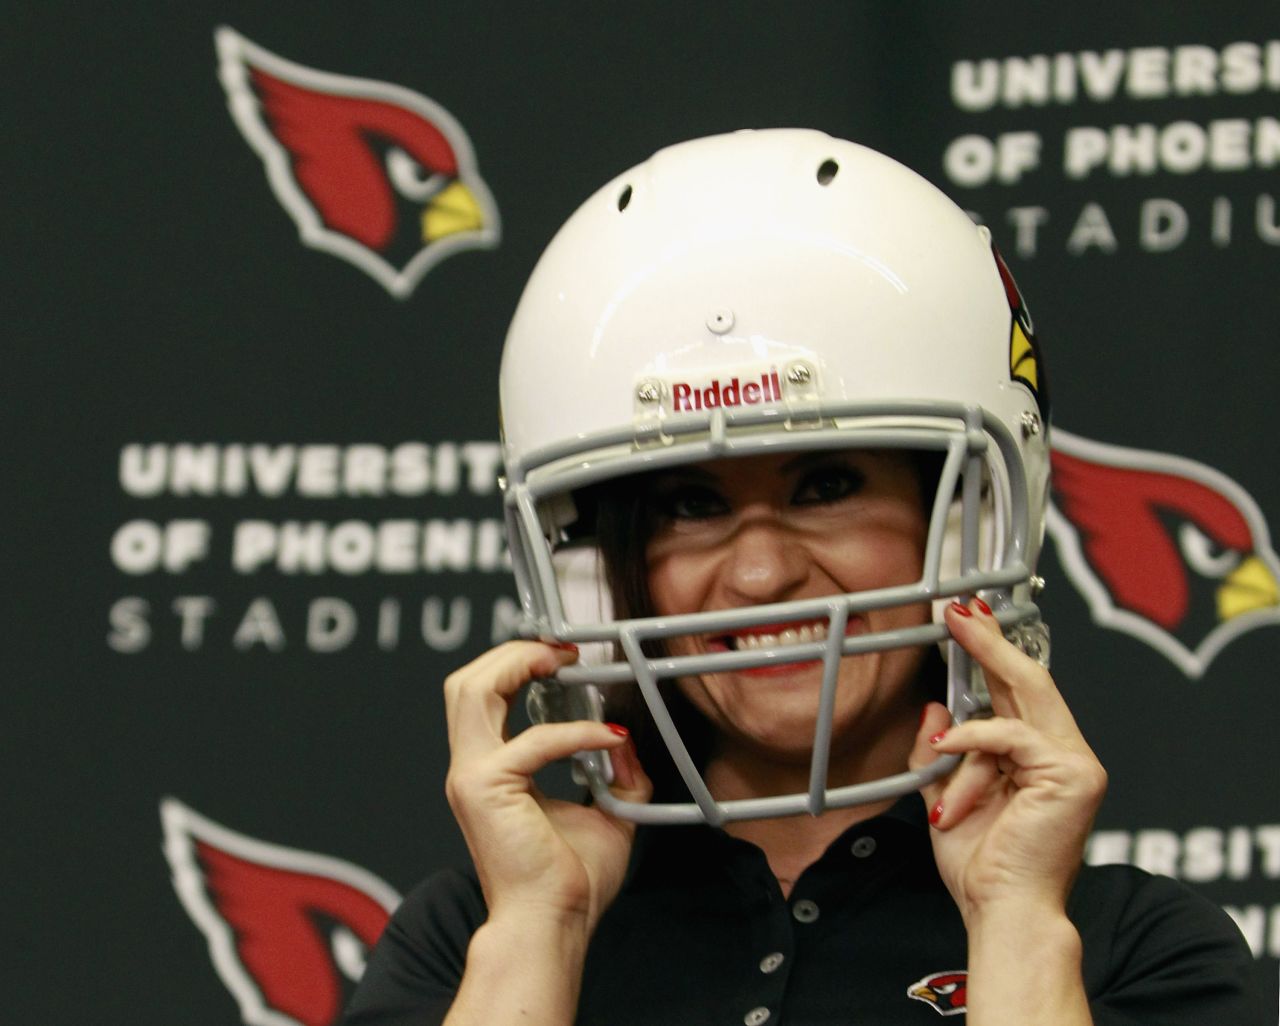 Jen Welter has been named an intern coach with the NFL's Arizona Cardinals. Welter, who will work with the inside linebackers through training camp and the preseason, is the first female to hold a coaching position of any kind in the NFL.